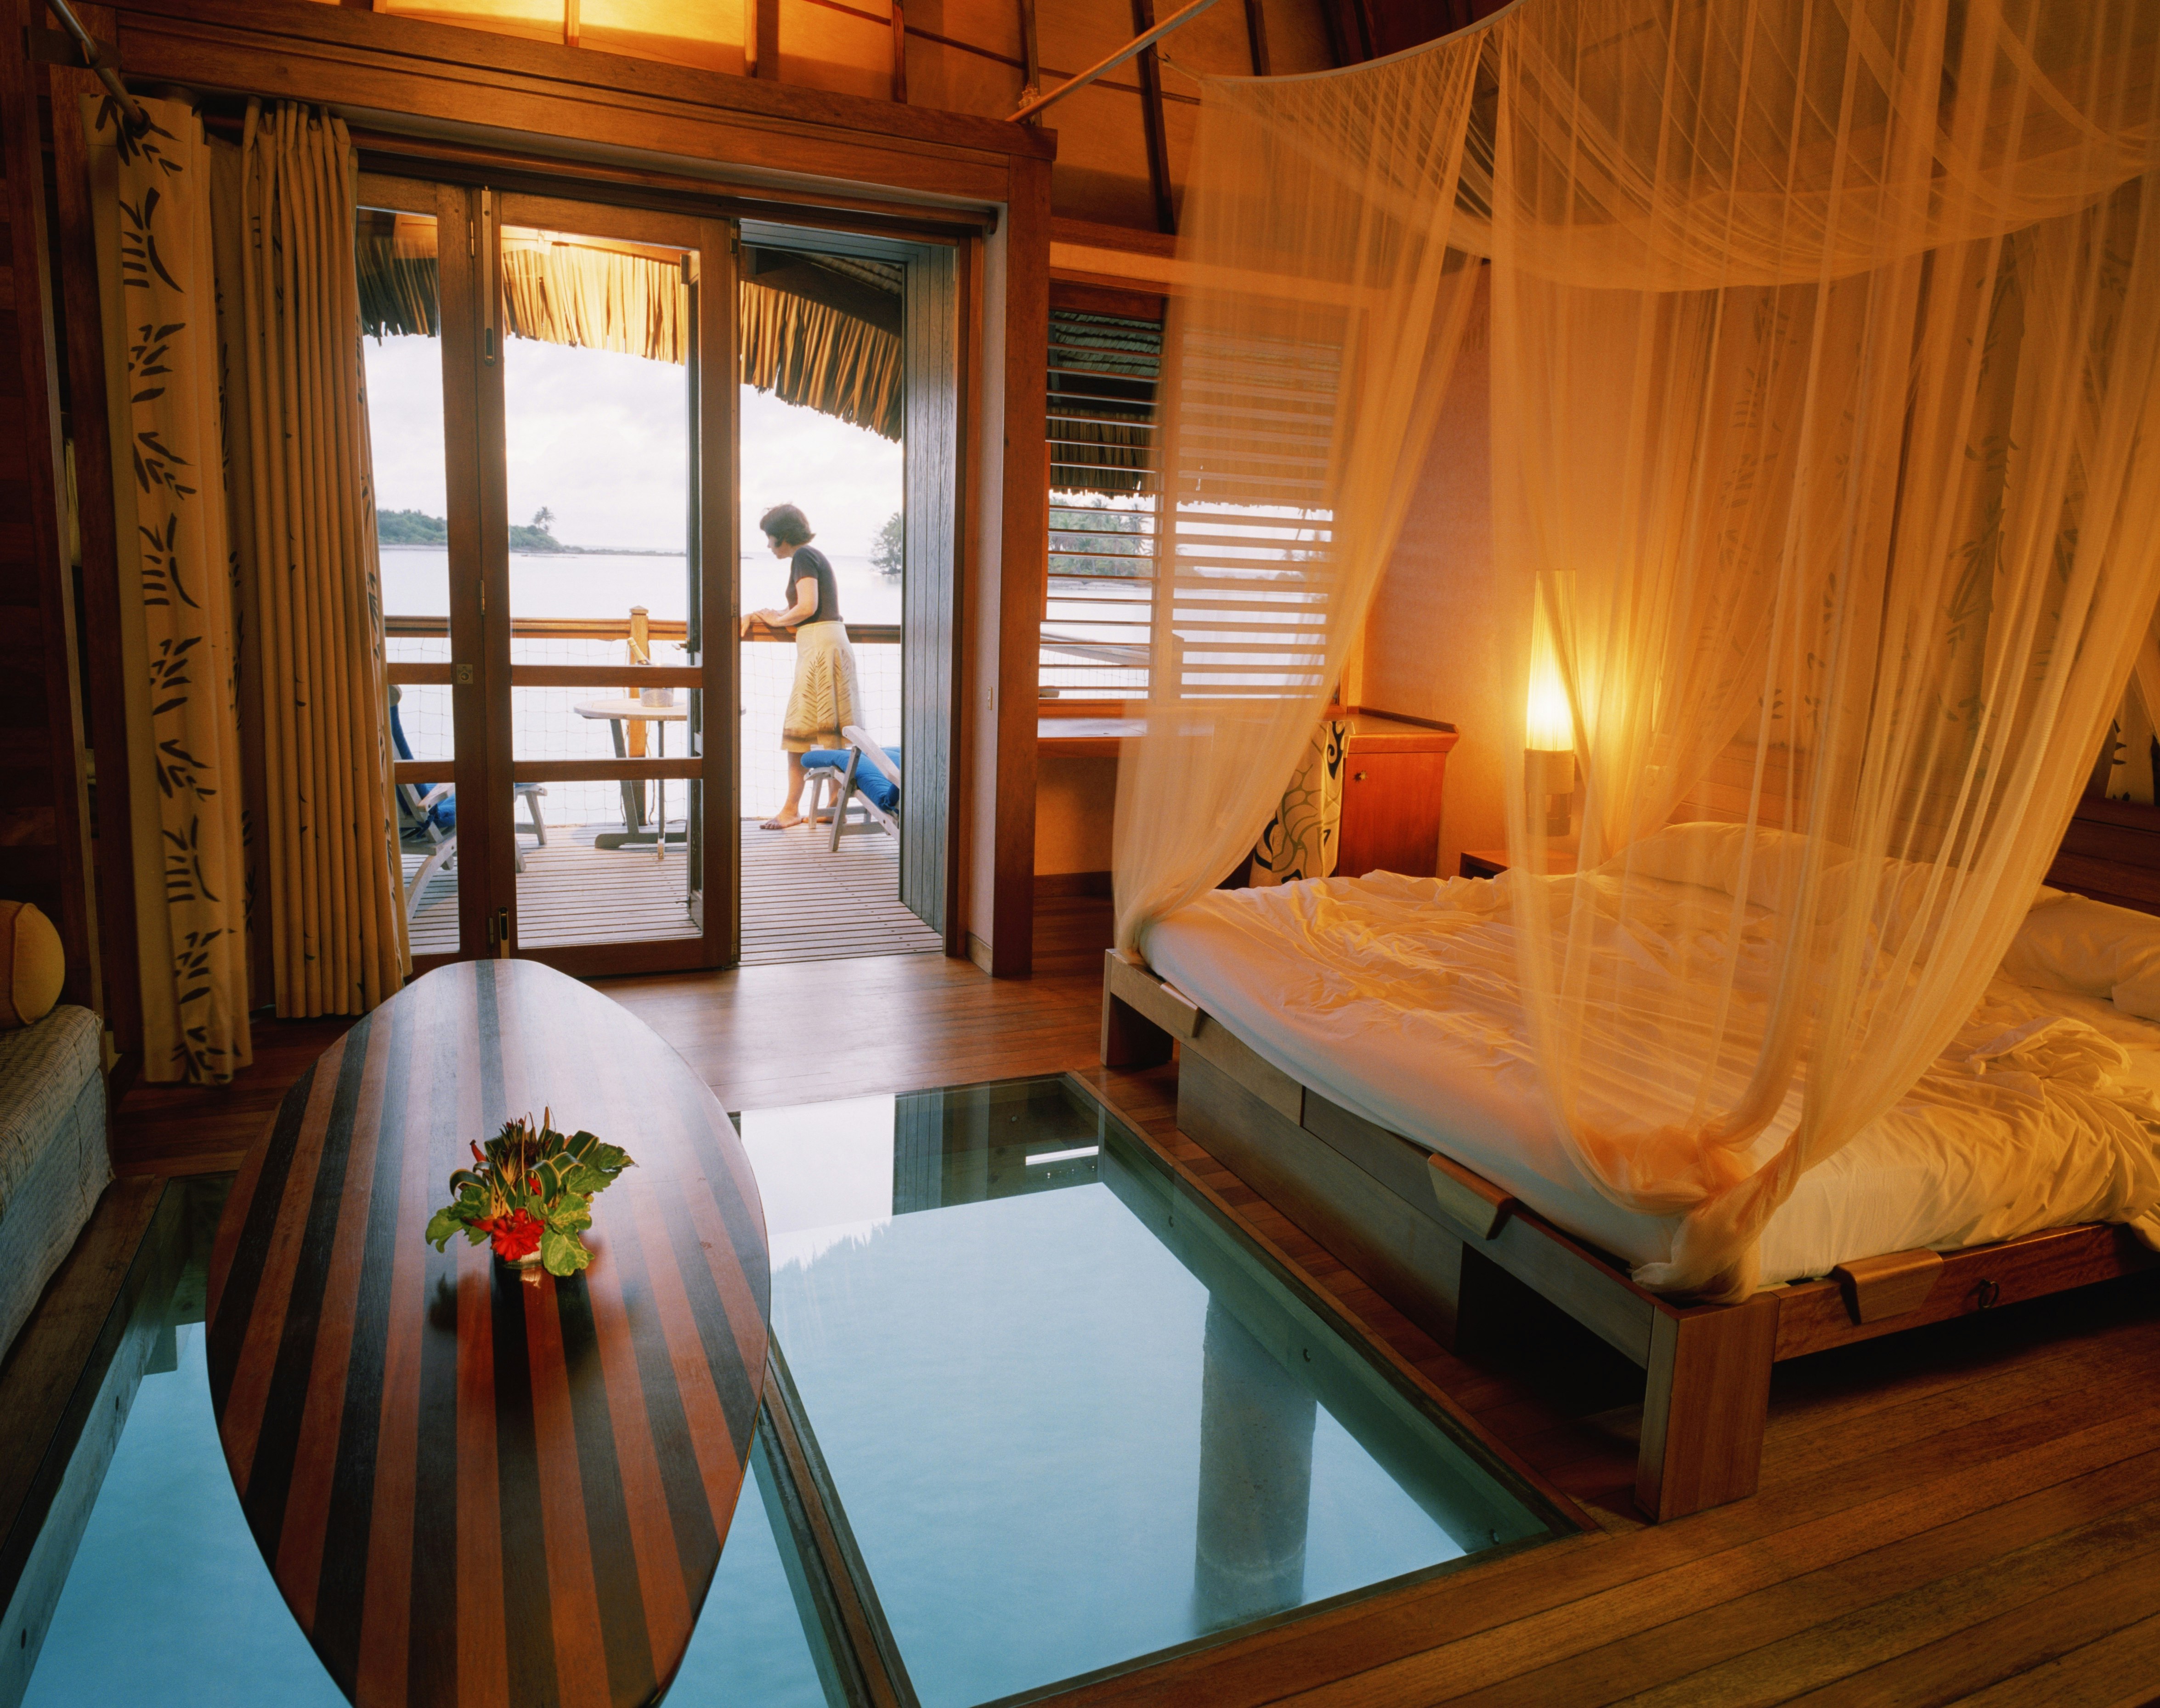 An overwater bungalow in Hotel Le Meridien in Bora Bora, where there are not only tropical views out the windows and off-deck, but also underwater via a glass floor. The bed is a simple wood platform with white sheets and mosquito netting. The wood is wide planks in a similar warm tone. A surf-board shaped coffee table of inlaid light and dark wood sits over the glass floor window. On the deck, a woman in a white skirt and black top pauses by the railing.